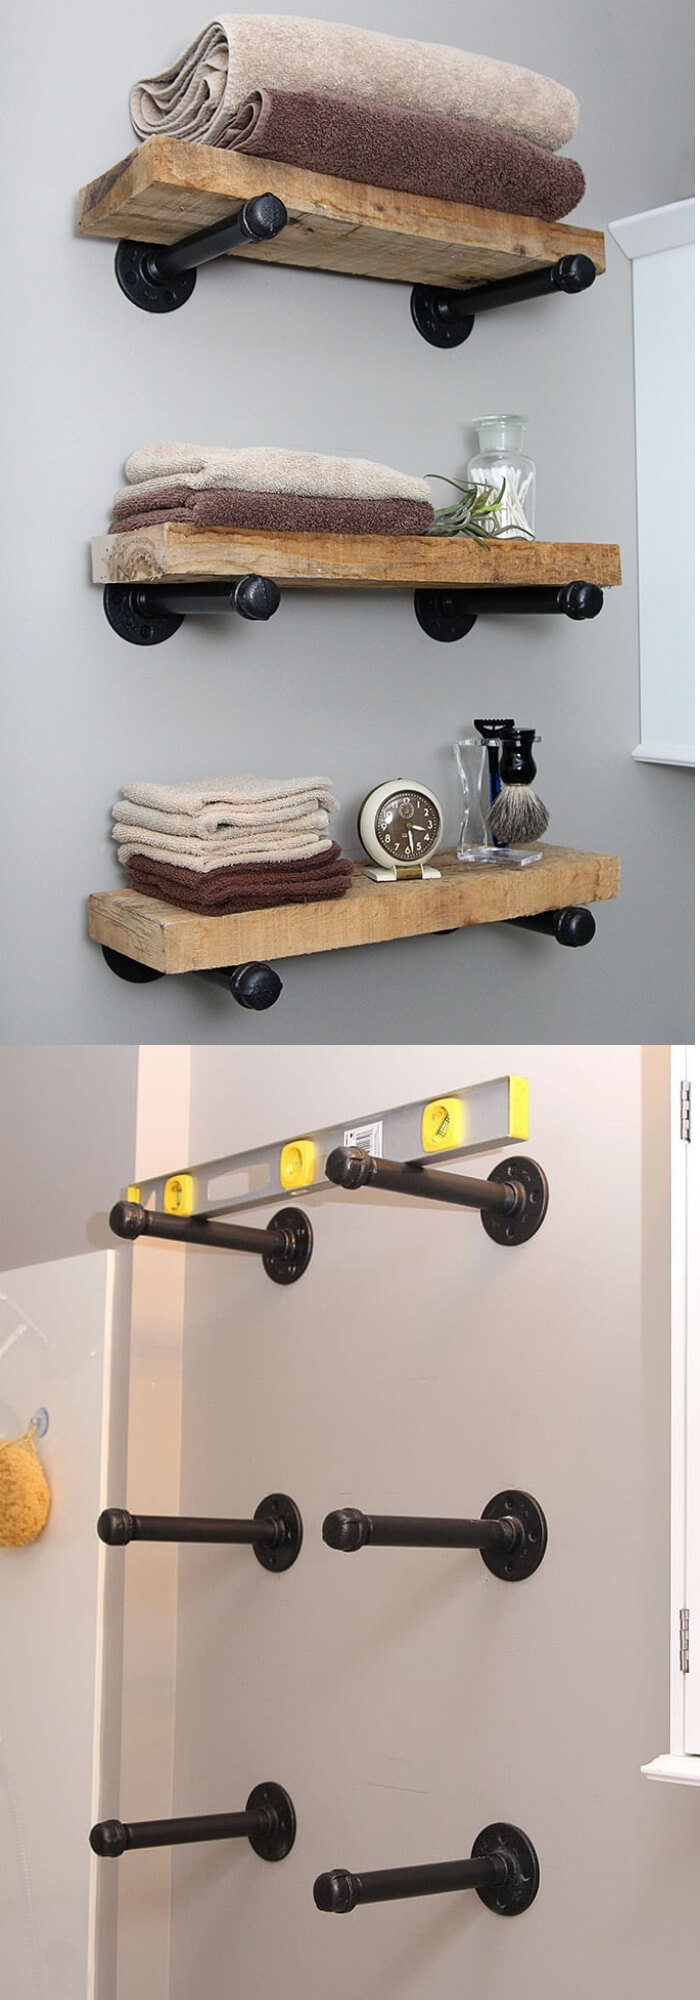 Pipe and wood shelves | Best Over the Toilet Storage Ideas for Bathroom